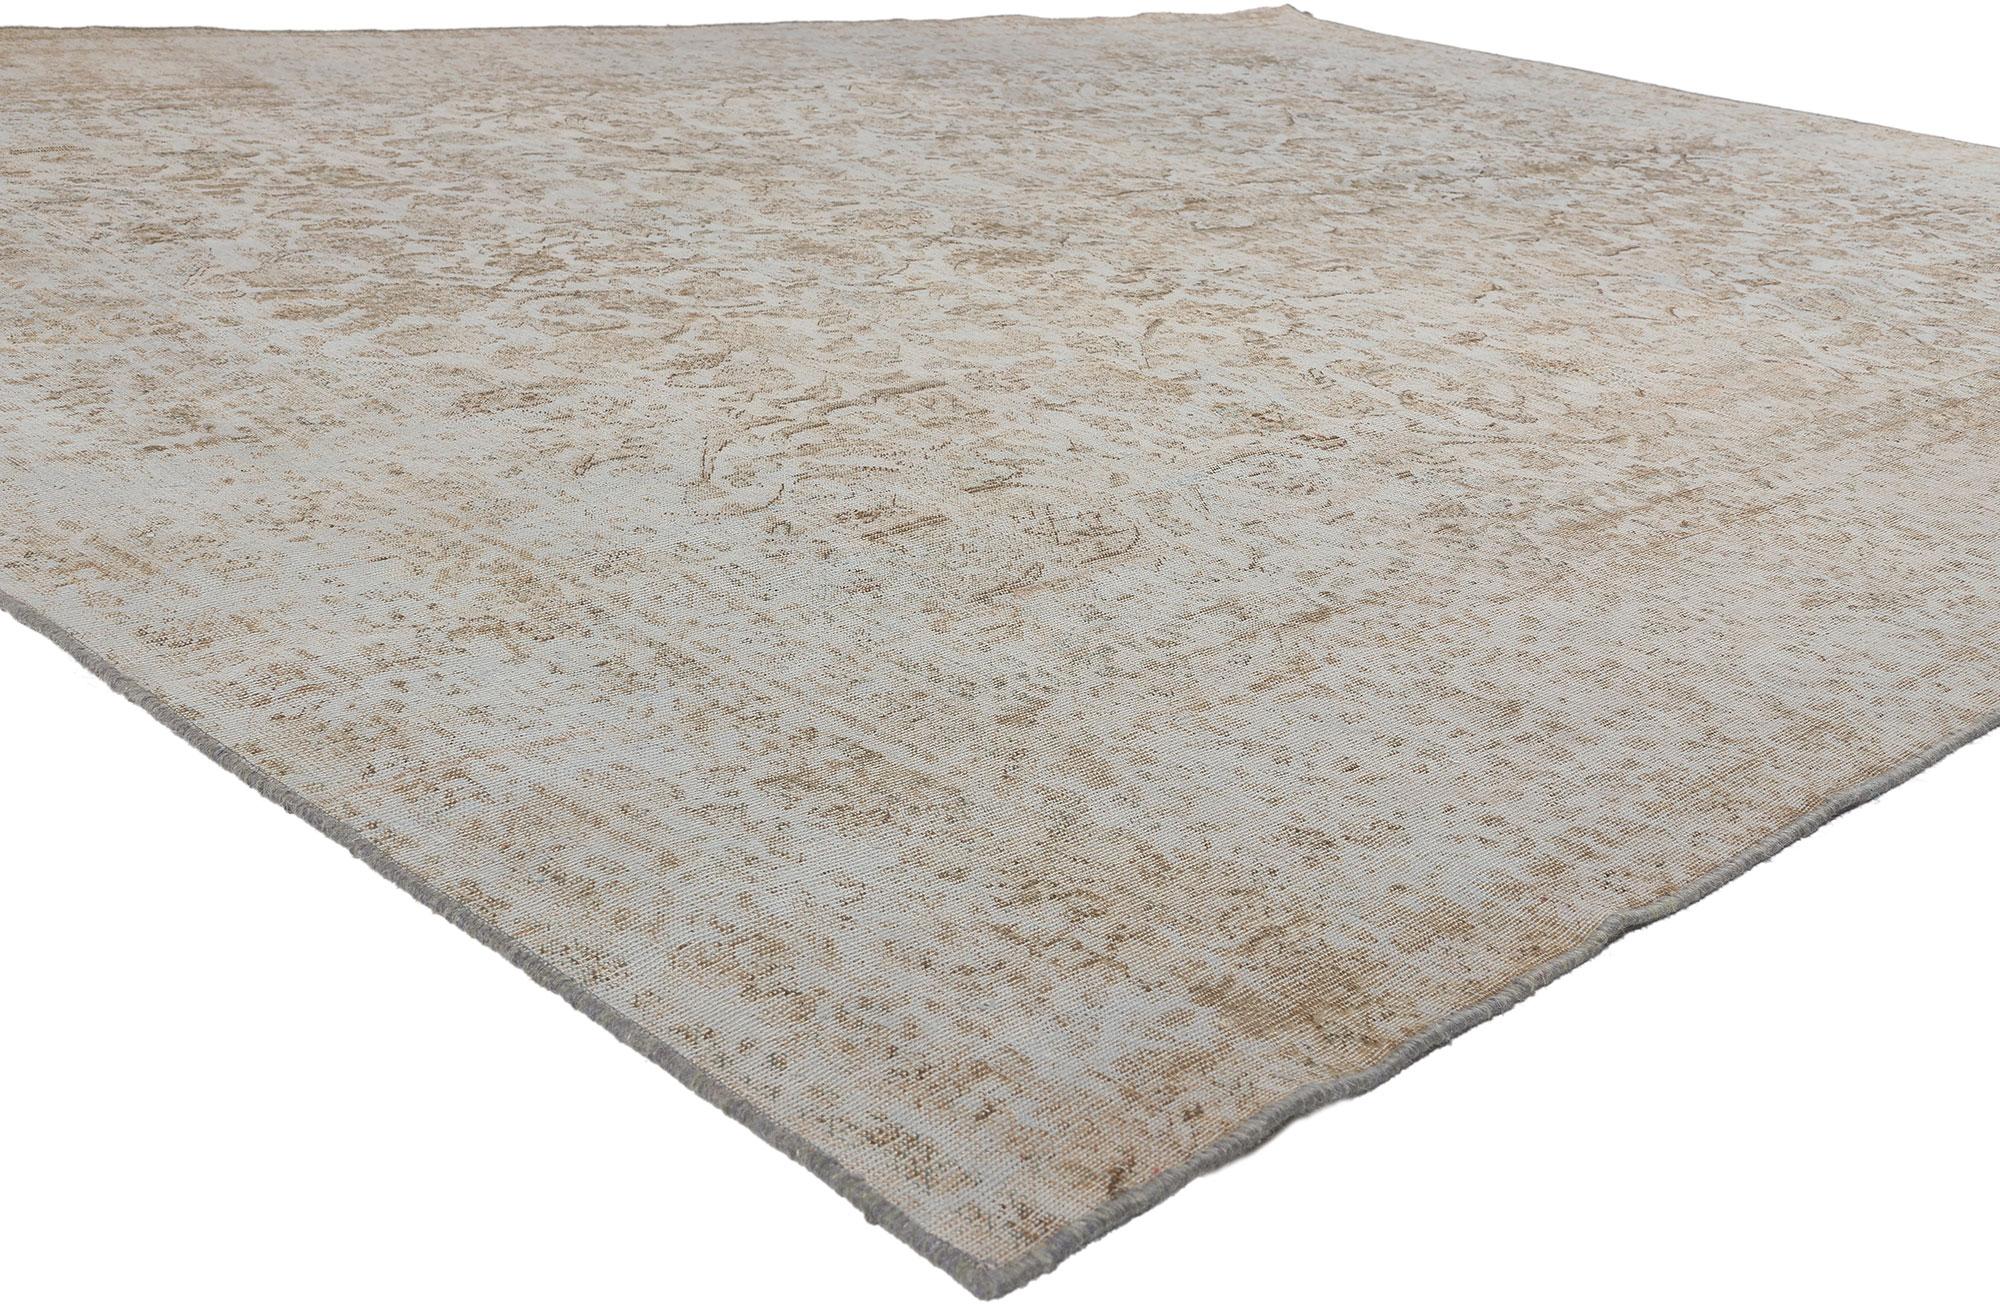 60770 Vintage Muted Turkish Rug, 09’05 x 12’07. In this hand-knotted wool distressed vintage Turkish rug, timeless elegance intertwines with quiet sophistication, resulting in a piece that exudes understated charm and refined allure. Its